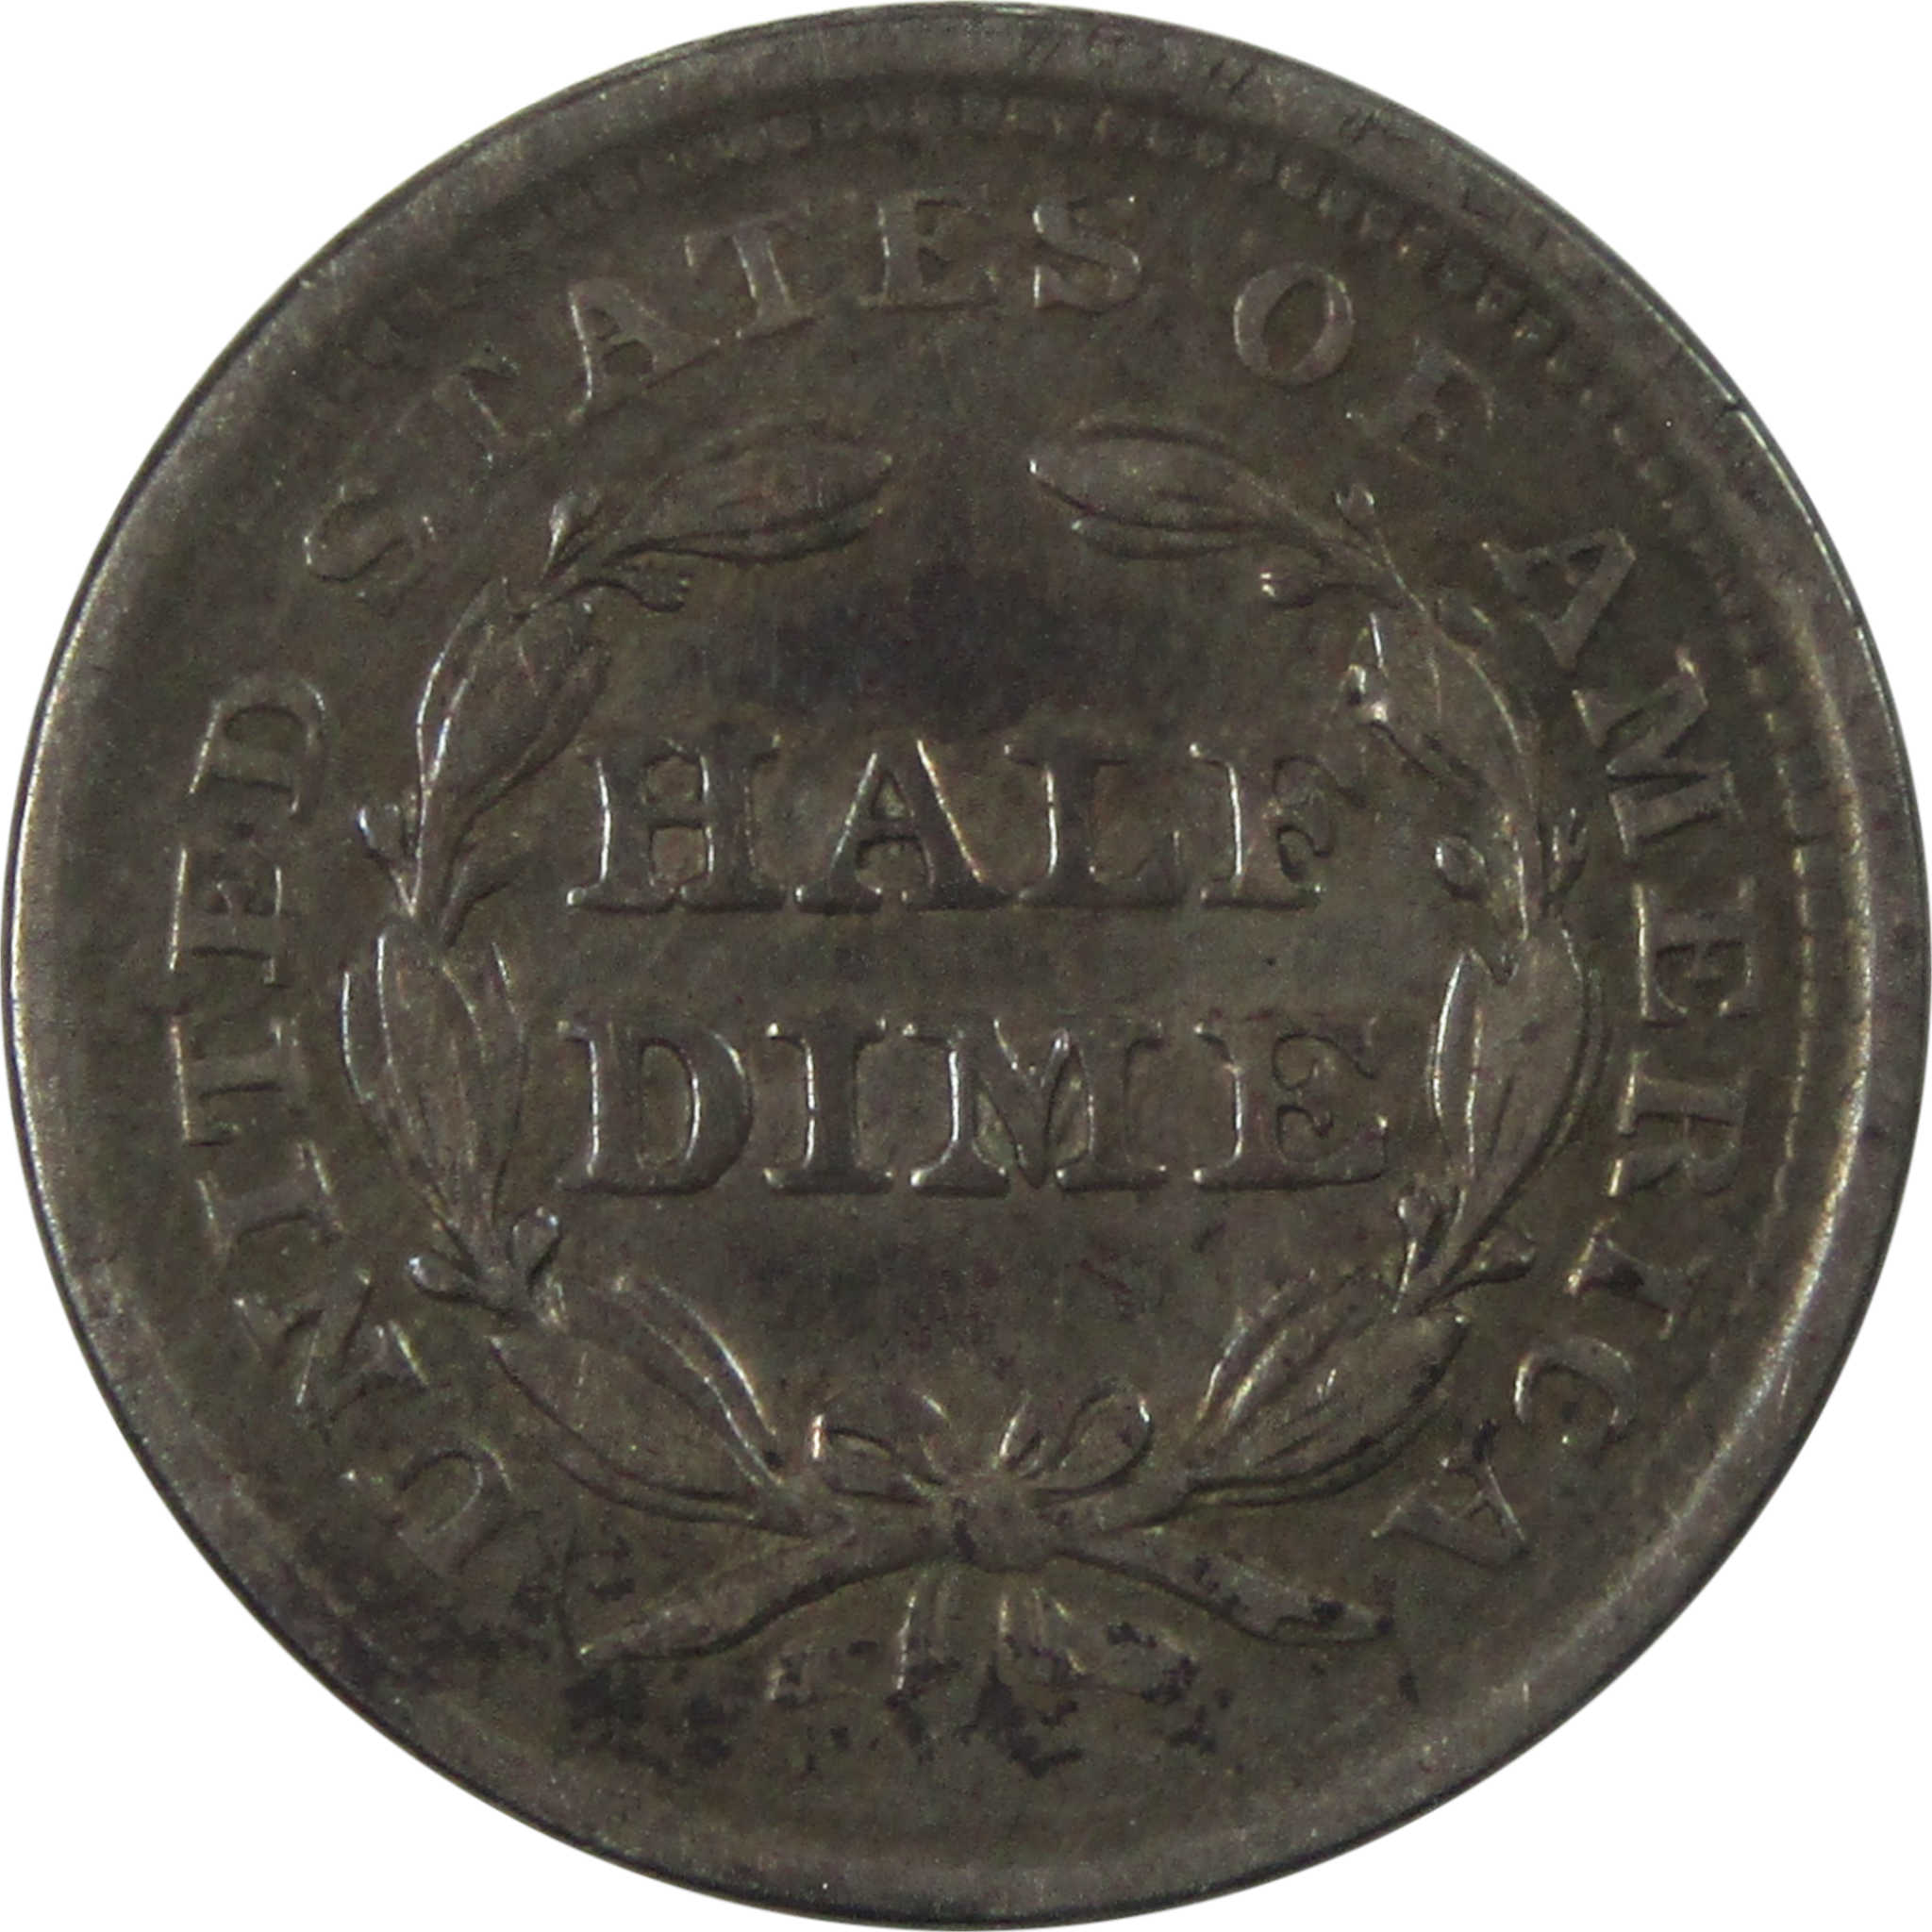 1857 Seated Liberty Half Dime XF EF Extremely Fine Silver SKU:I13966